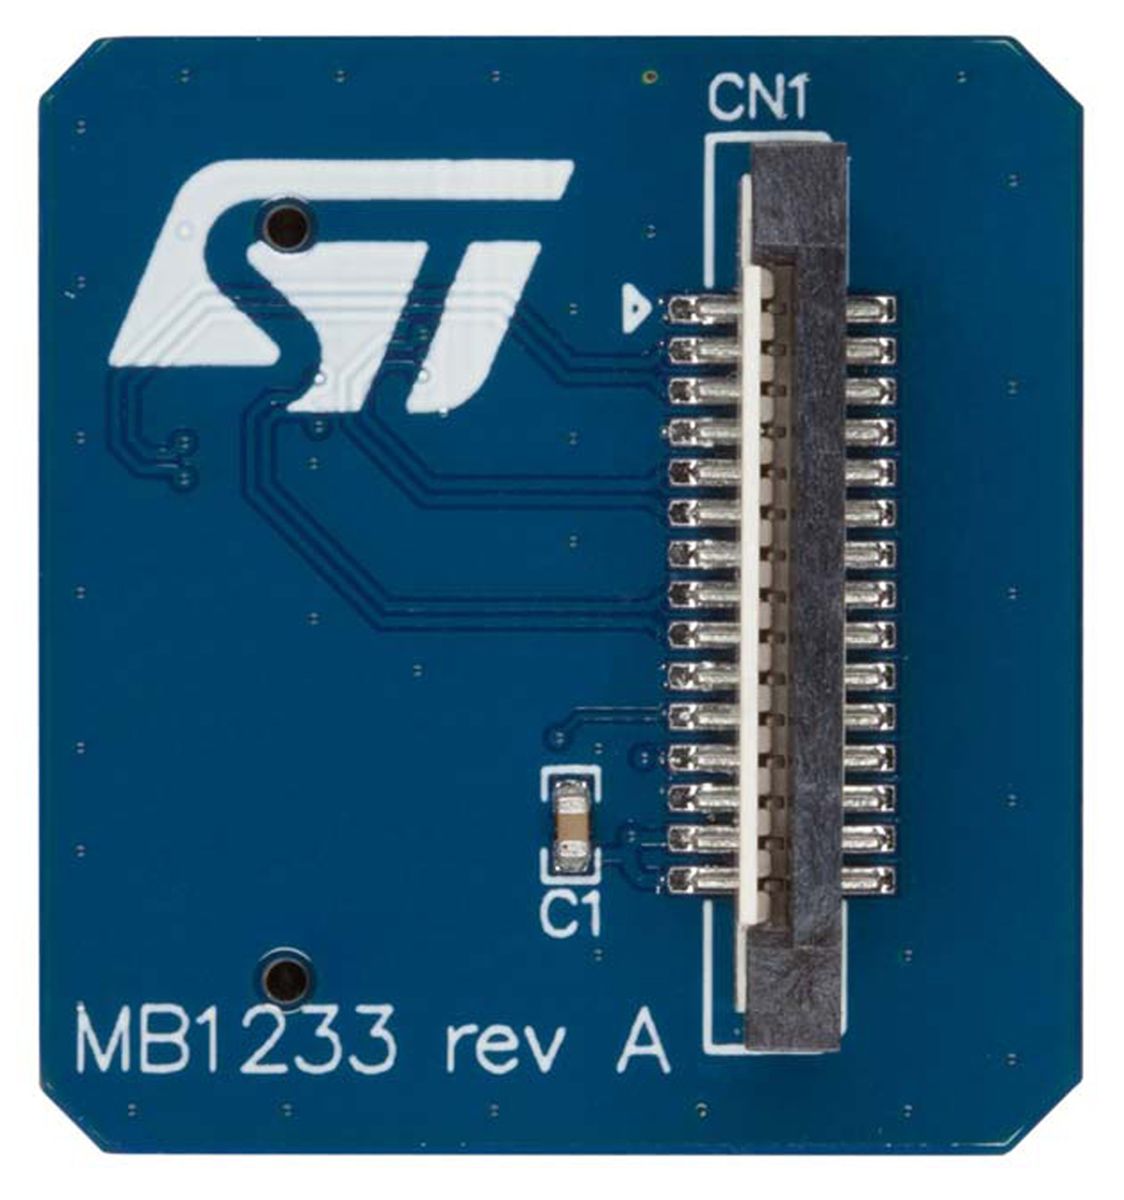 STMicroelectronics, MIPI/DSI to LCD Display Board